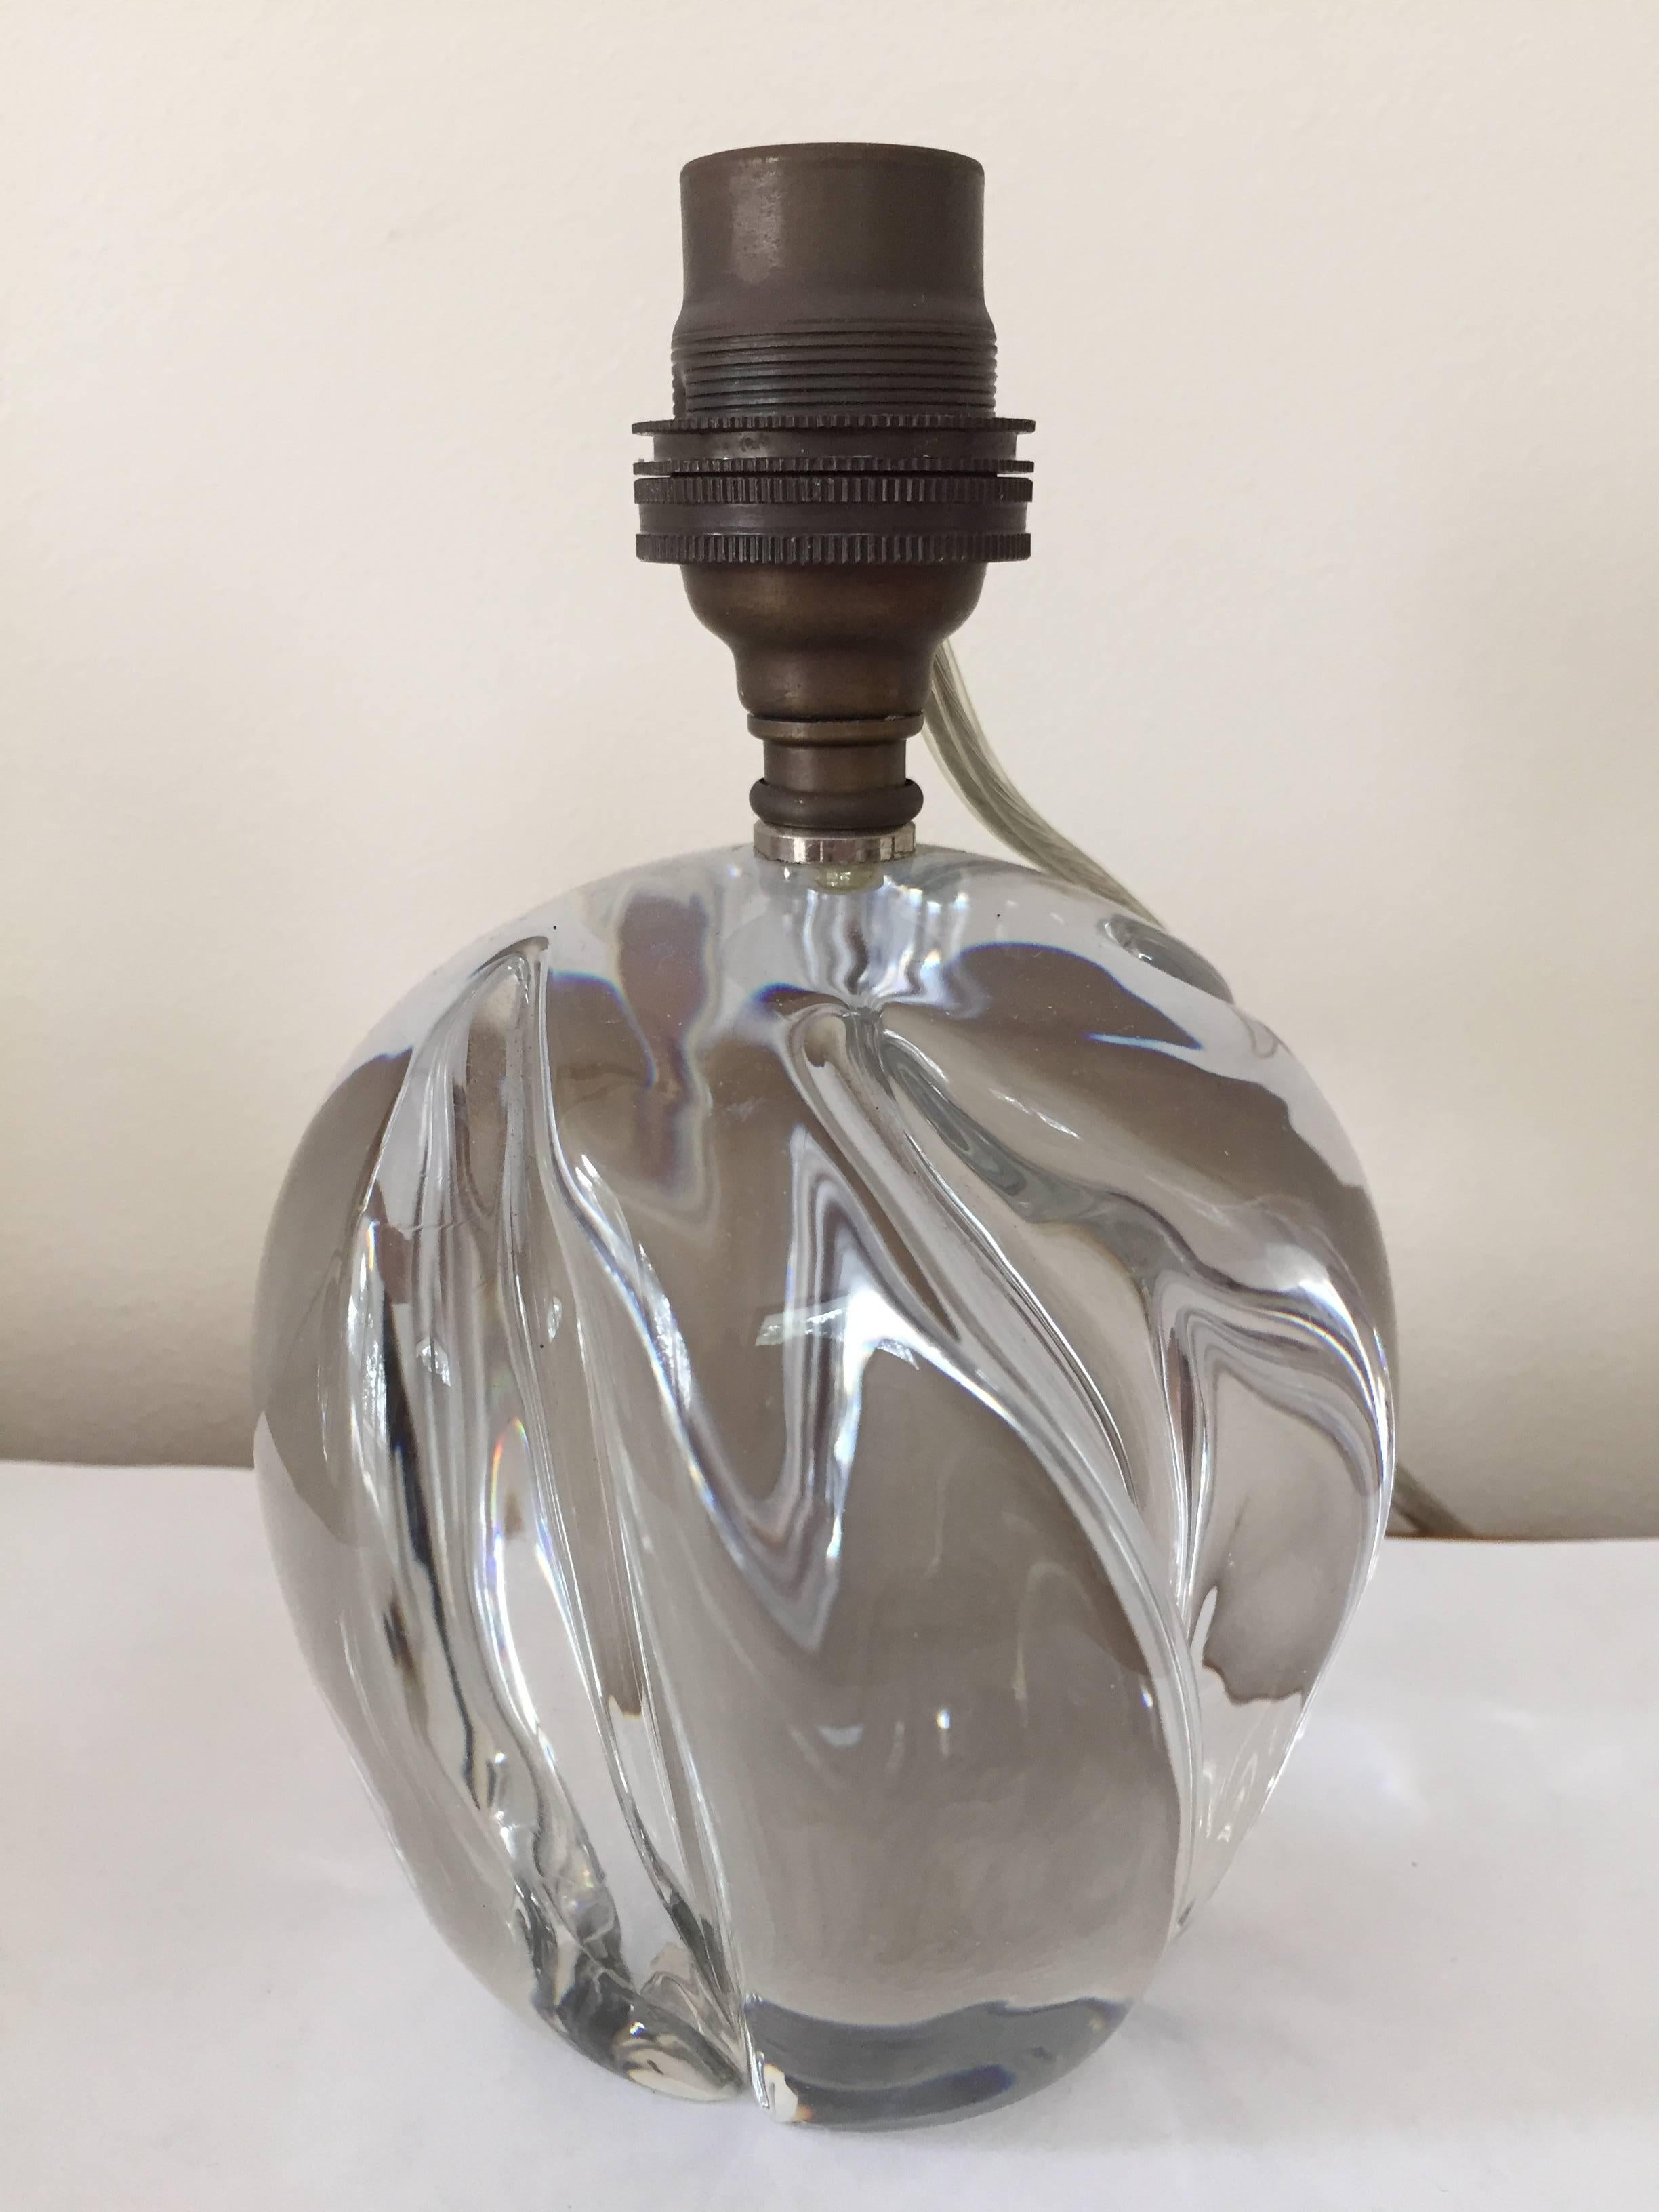 Sweet little clear crystal orb table lamps with molded surface contours. Wired in the French style from the back of socket. Item is 6.5"to top of socket.